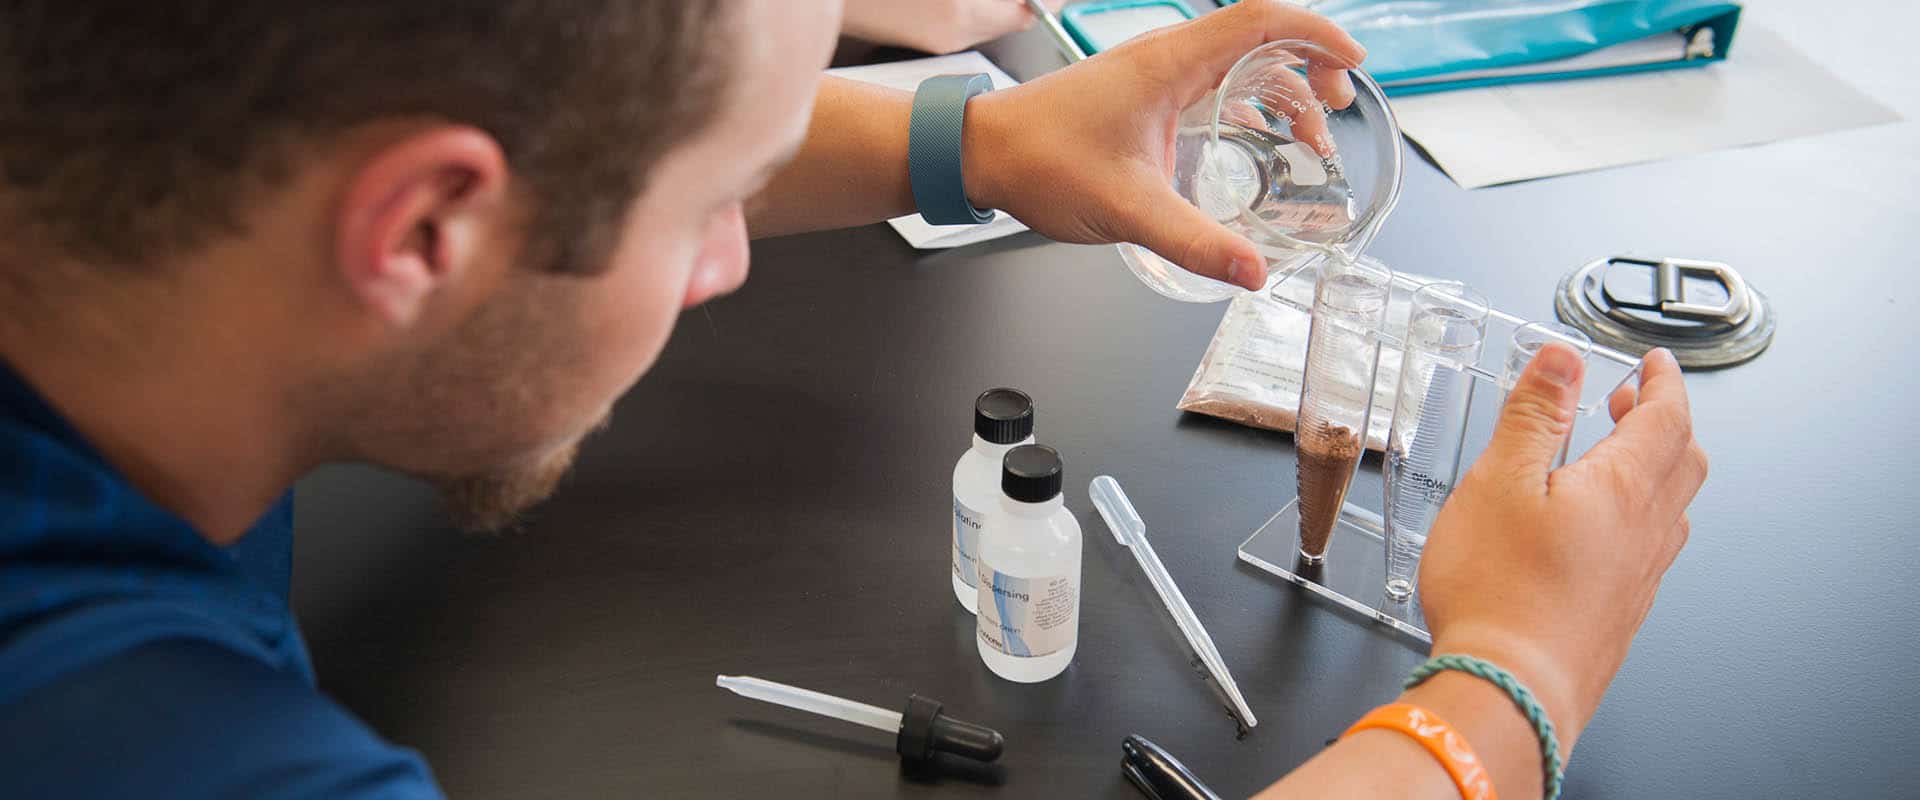 Student pouring liquid from a beaker into test tubes